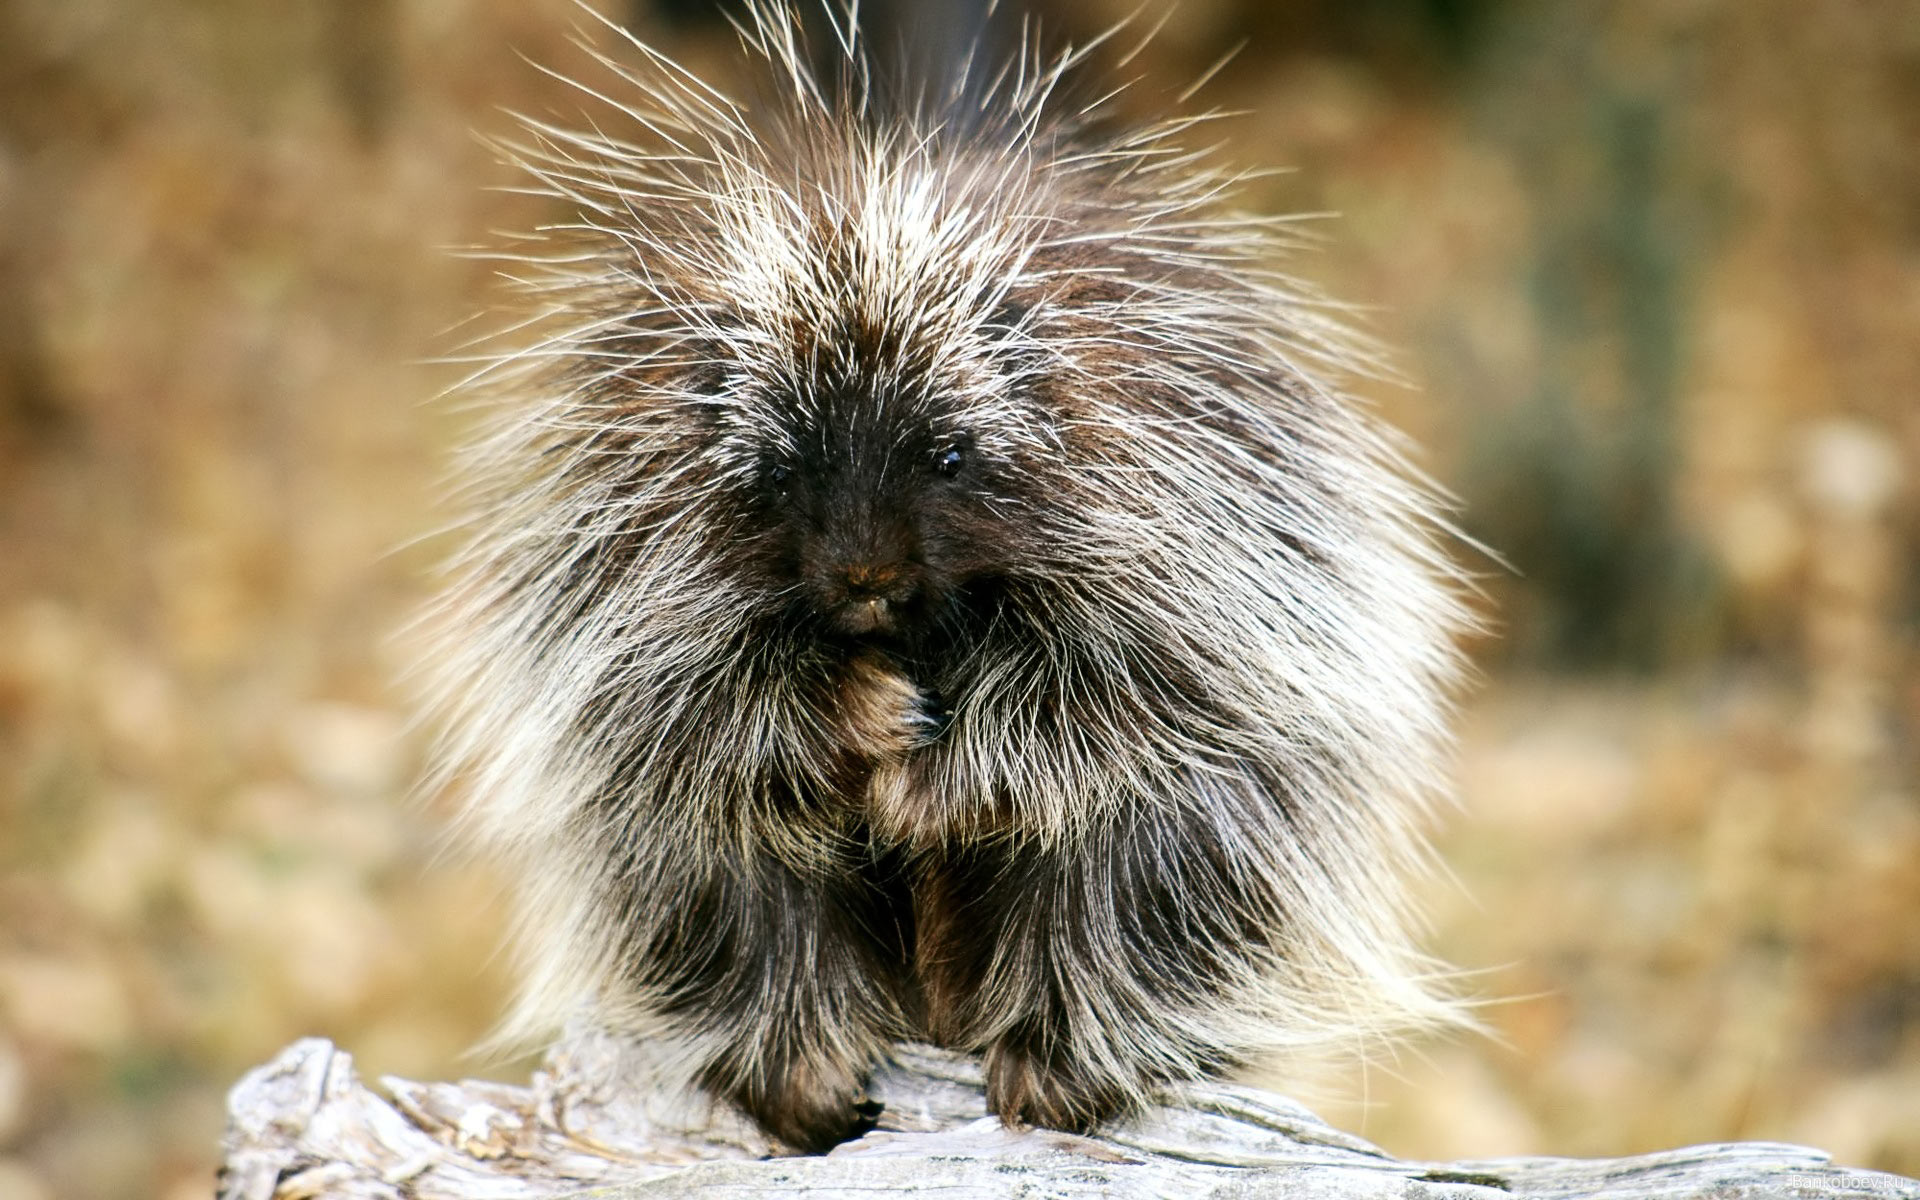  Baby Porcupine Exotic Animals hd Wallpaper and make this wallpaper for